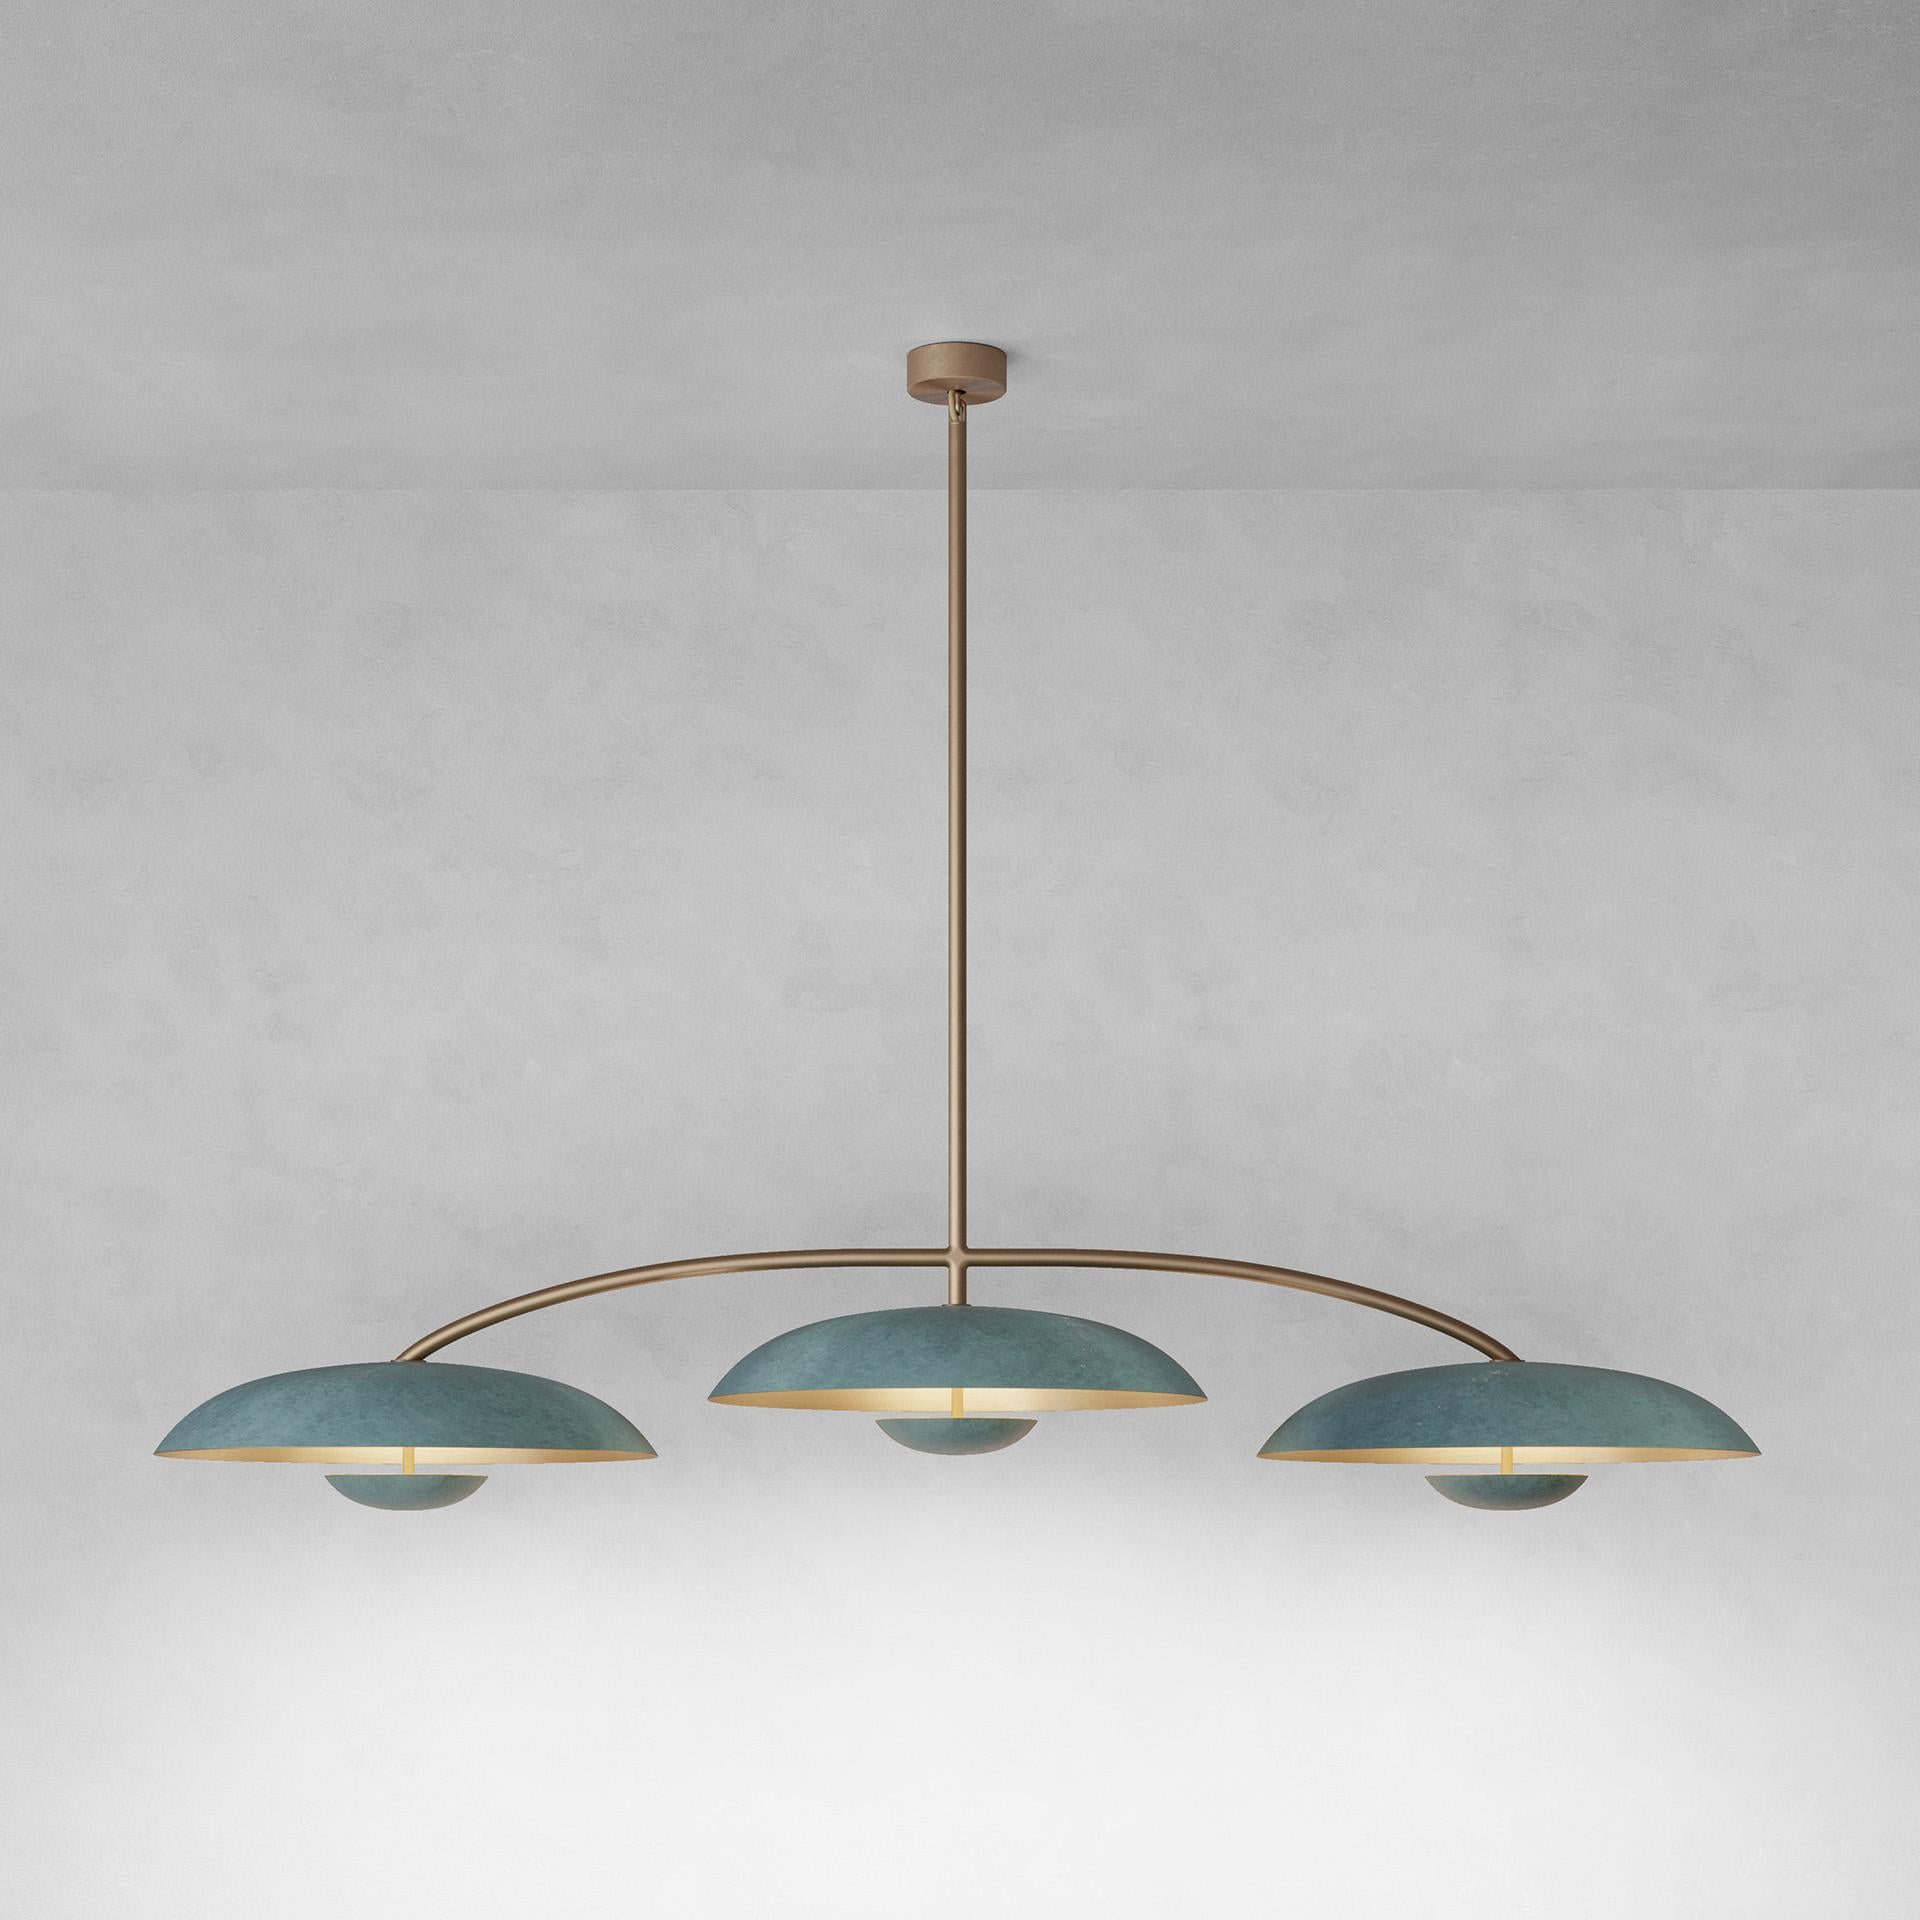 Orbit Trio Verdigris XL Ceiling Light by Atelier001
Dimensions: D60 x W160 x H115 cm
Materials: Shade Verdigris patinated brass
Framework Verdigris patinated brass & medium bronze
Also available: In different finishes. 

All our lamps can be wired